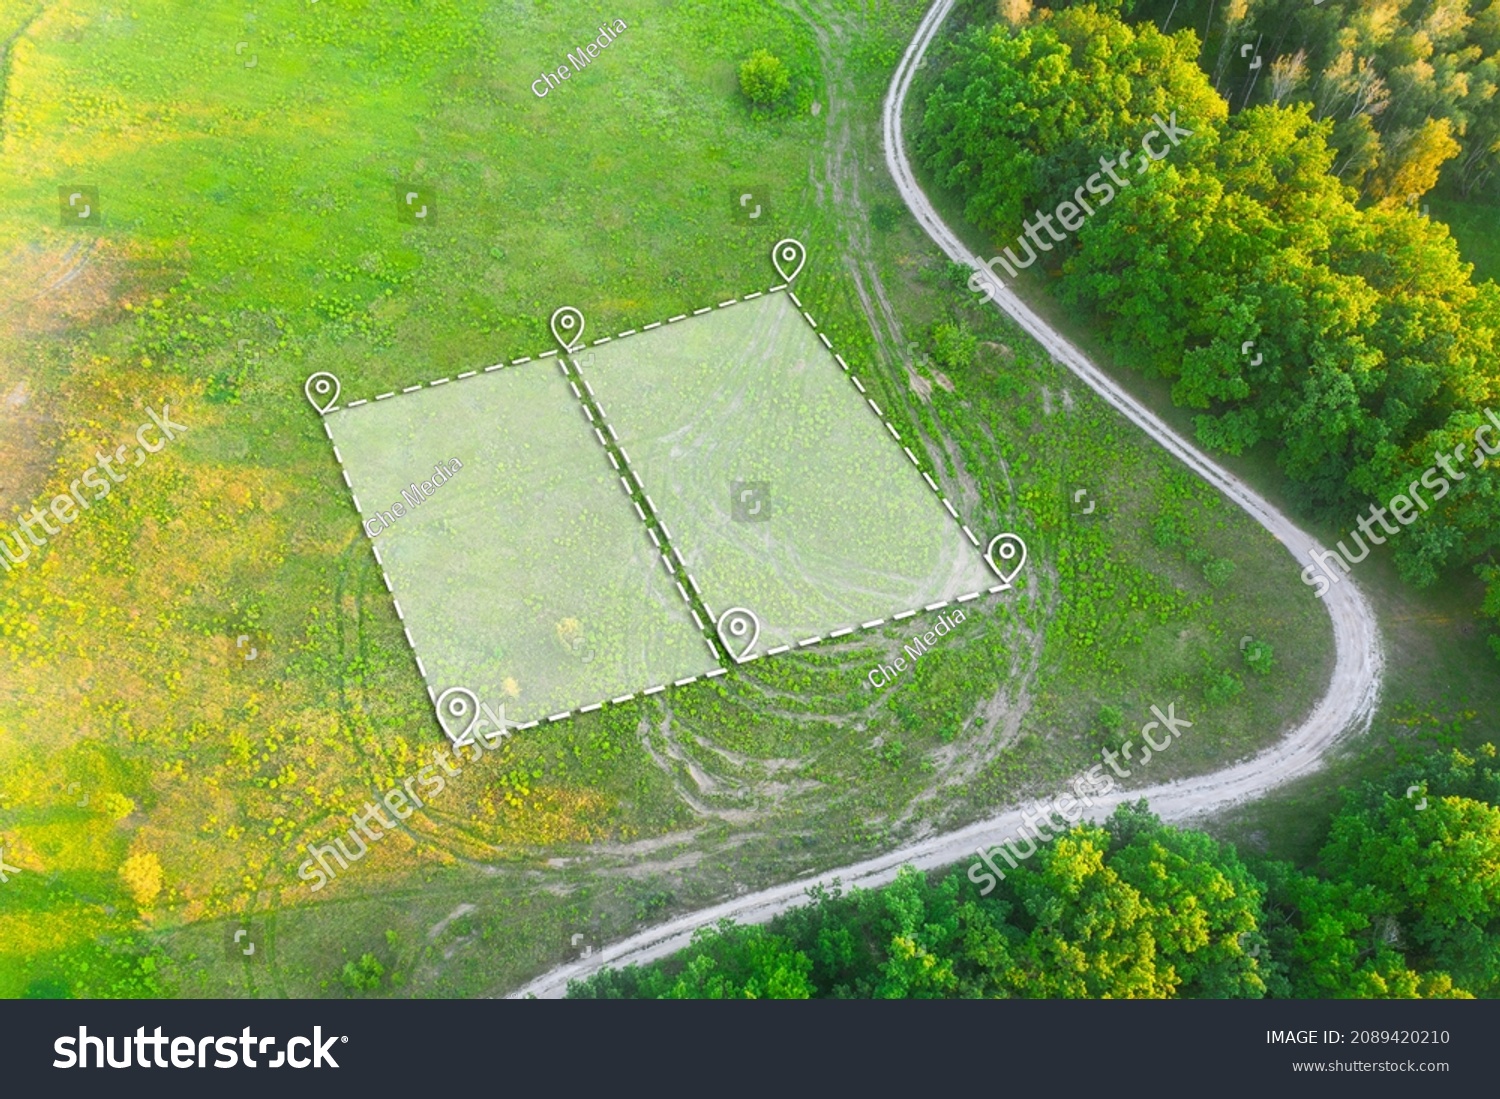 Land Plot for Housing on green field - aerial drone shot. Topographical Marking of two plots of Land for Private Residence House Construction. Land Plot plan Marking with white Overlay. #2089420210